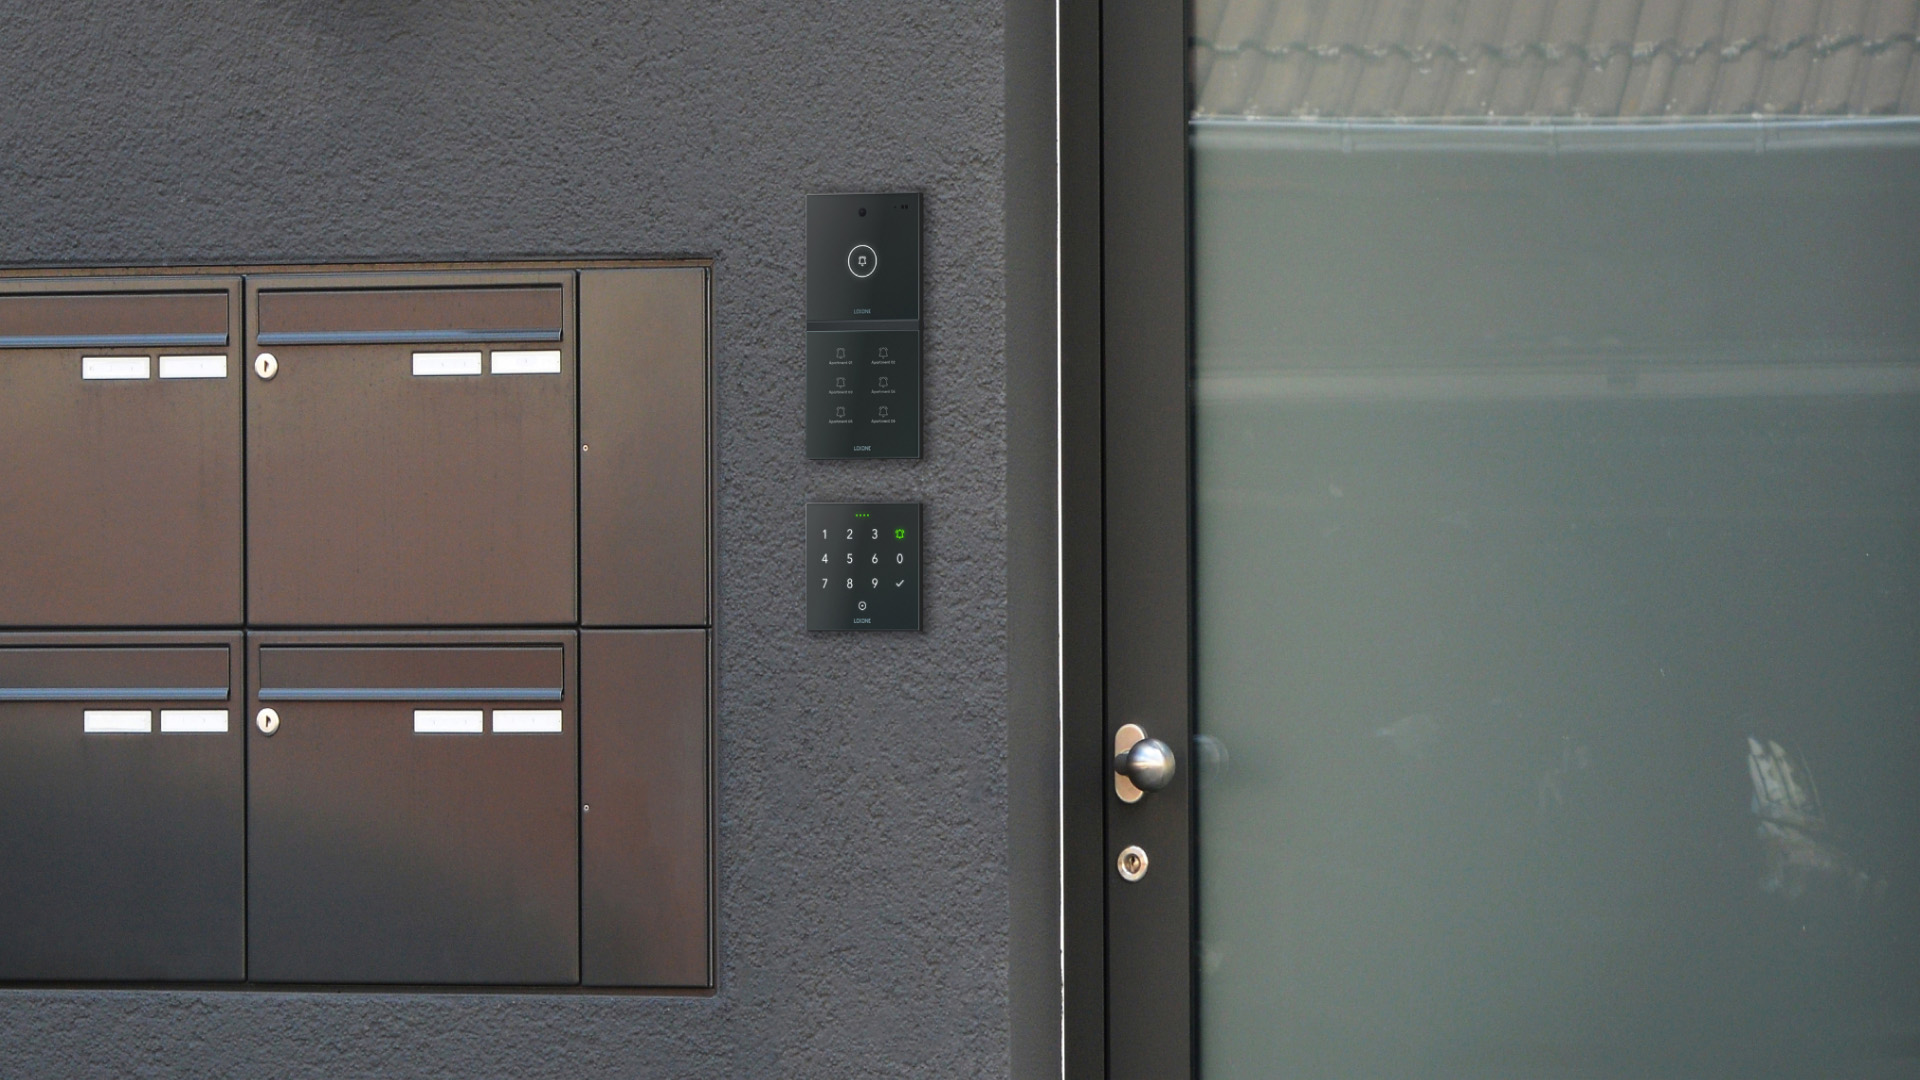 The Loxone Intercom and NFC Code Touch next to the front door of an MDU